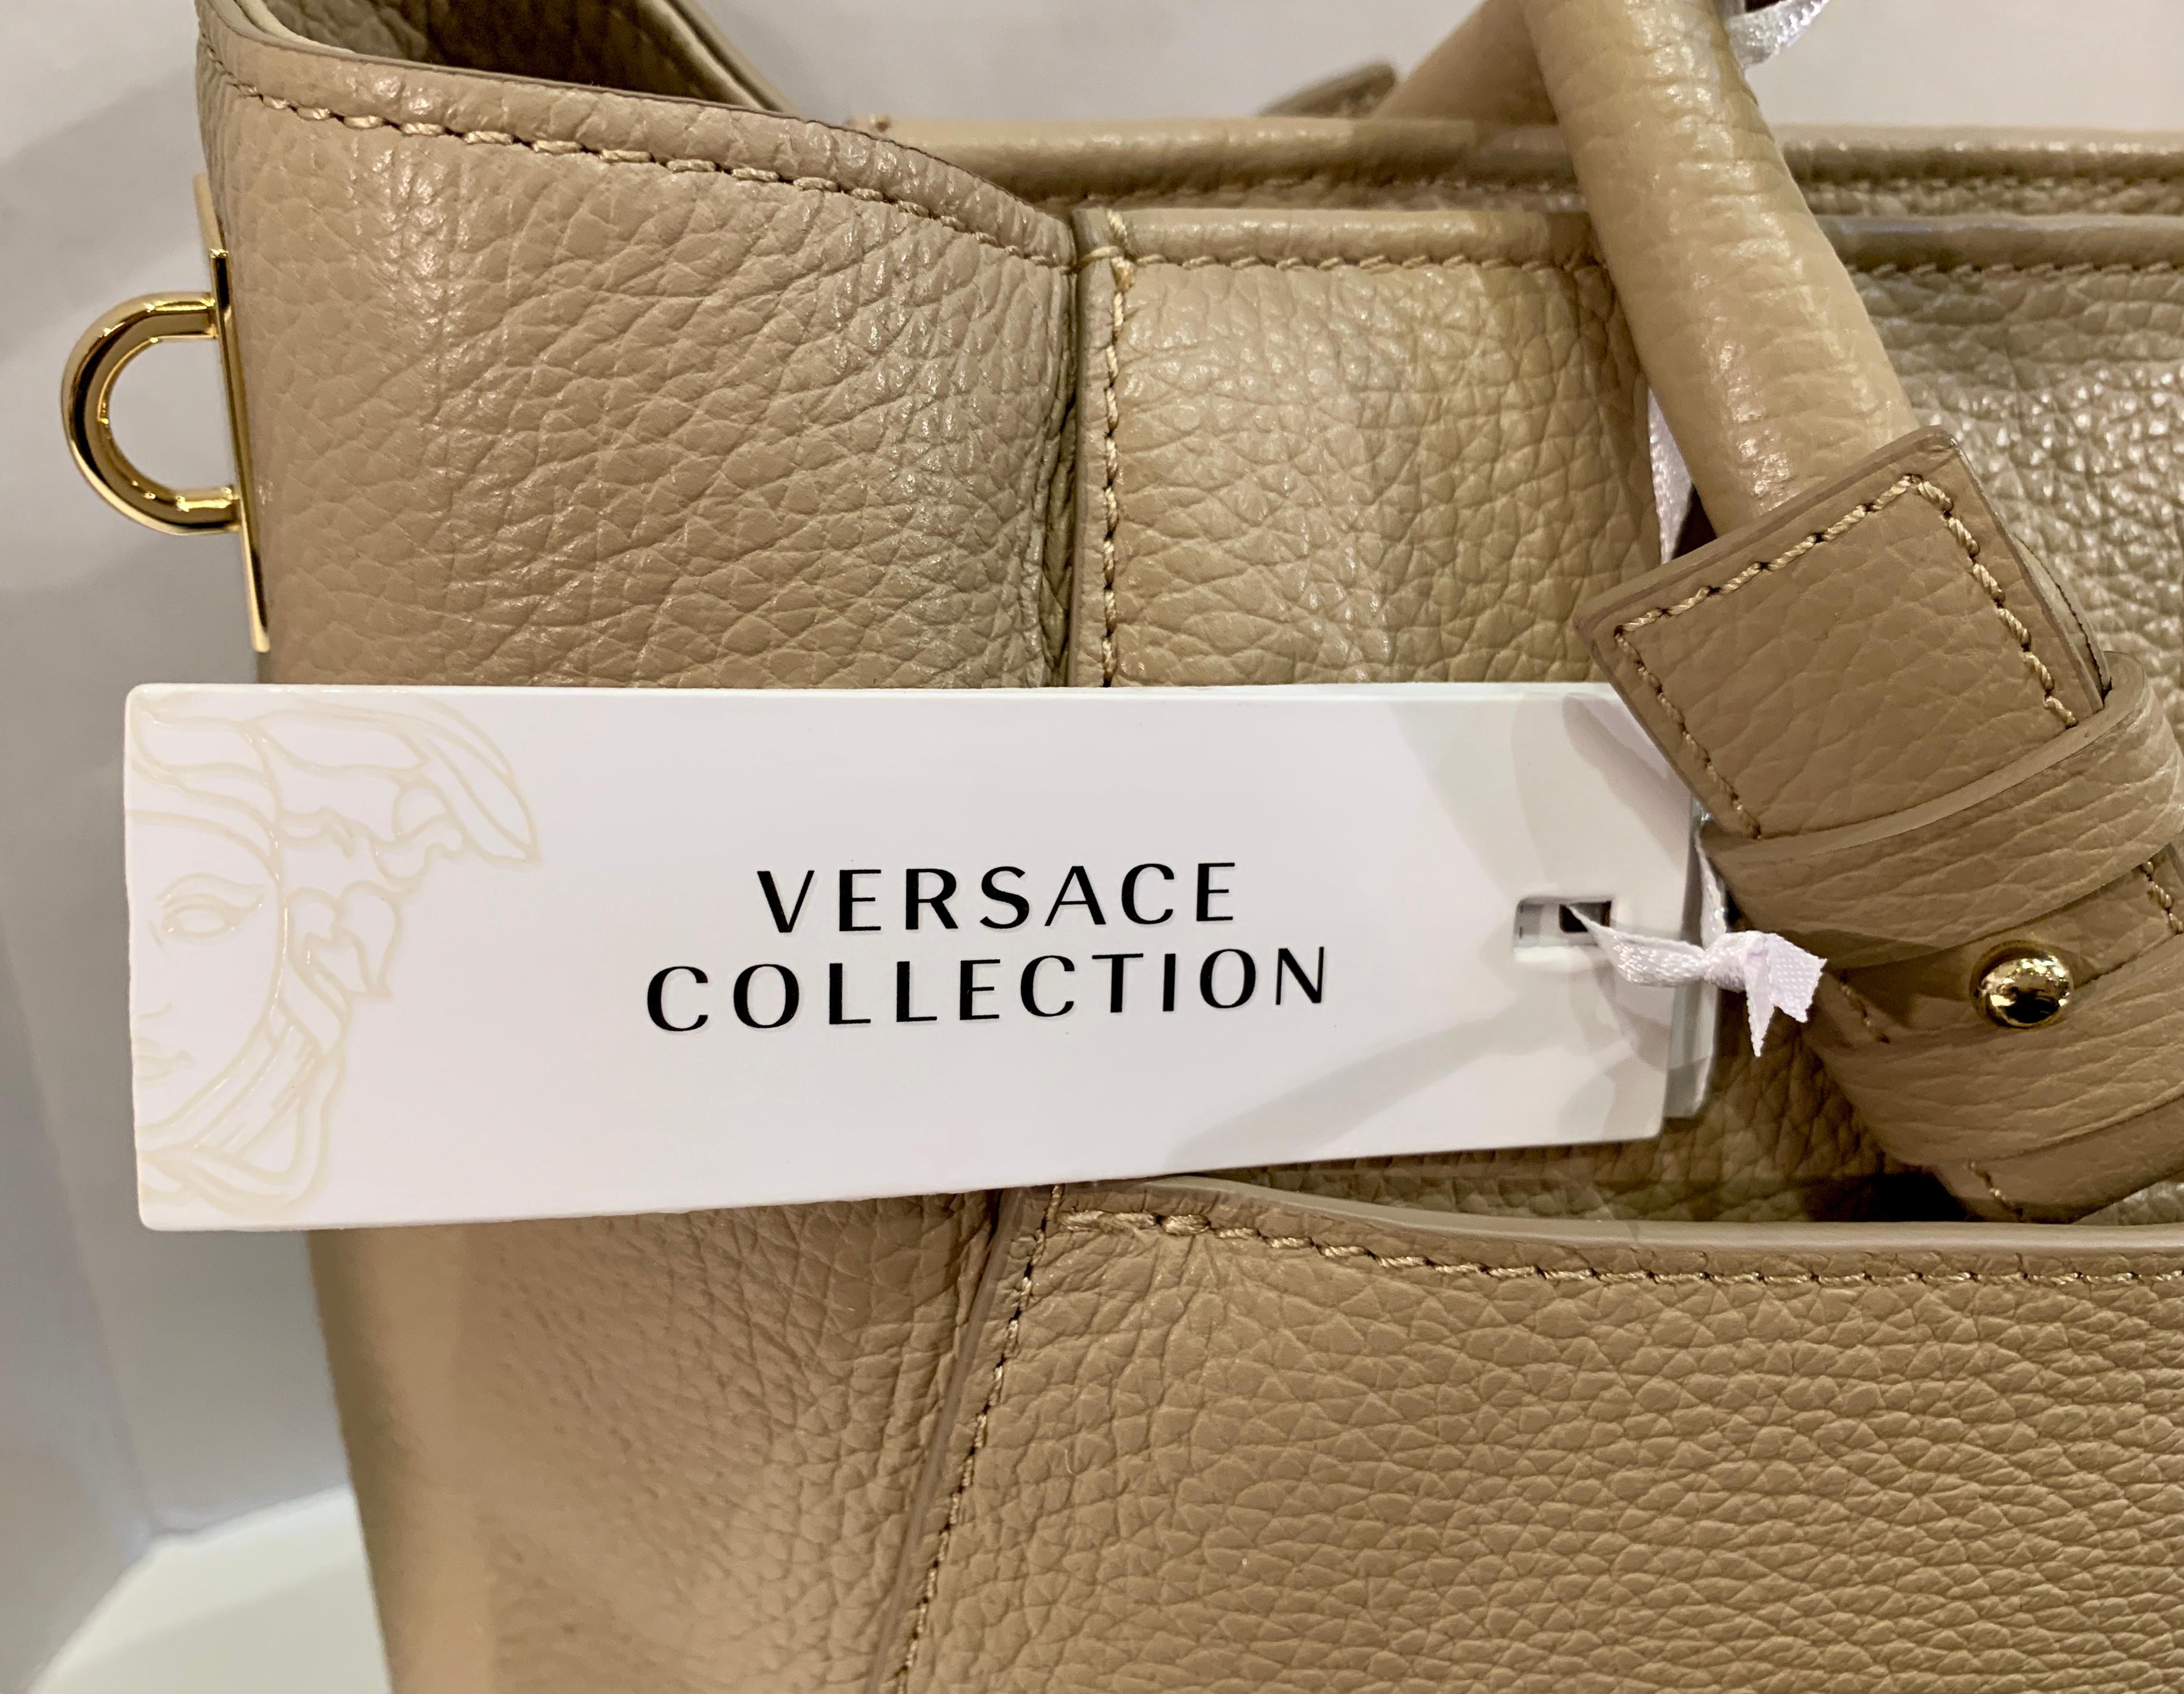 Large Versace Collection Neutral Textured Leather Tote Bag Purse Retail 1765.00 2